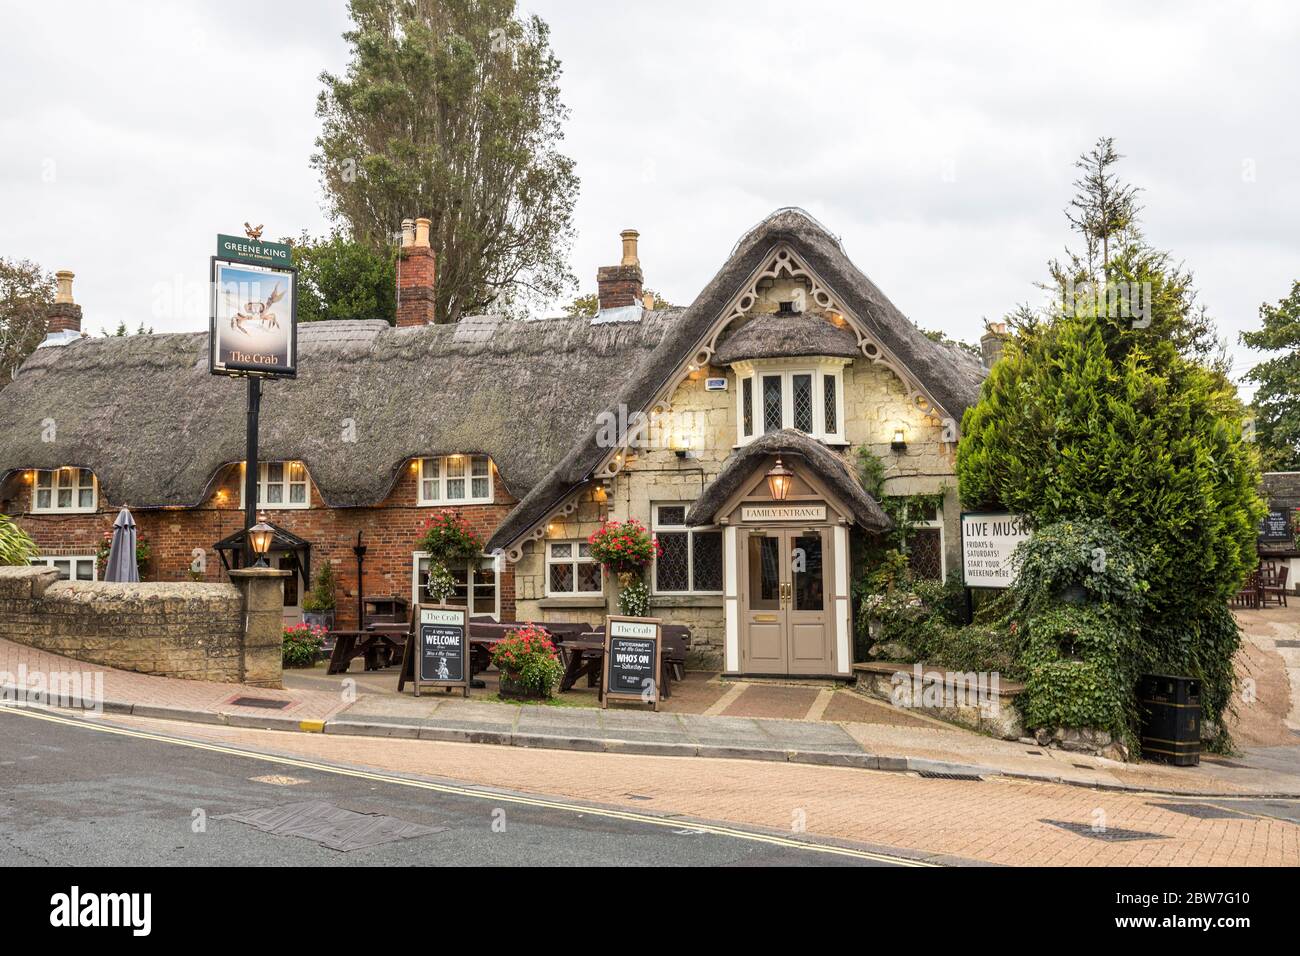 The Crab public house, Shanklin, Isle of Wight, UK Stock Photo